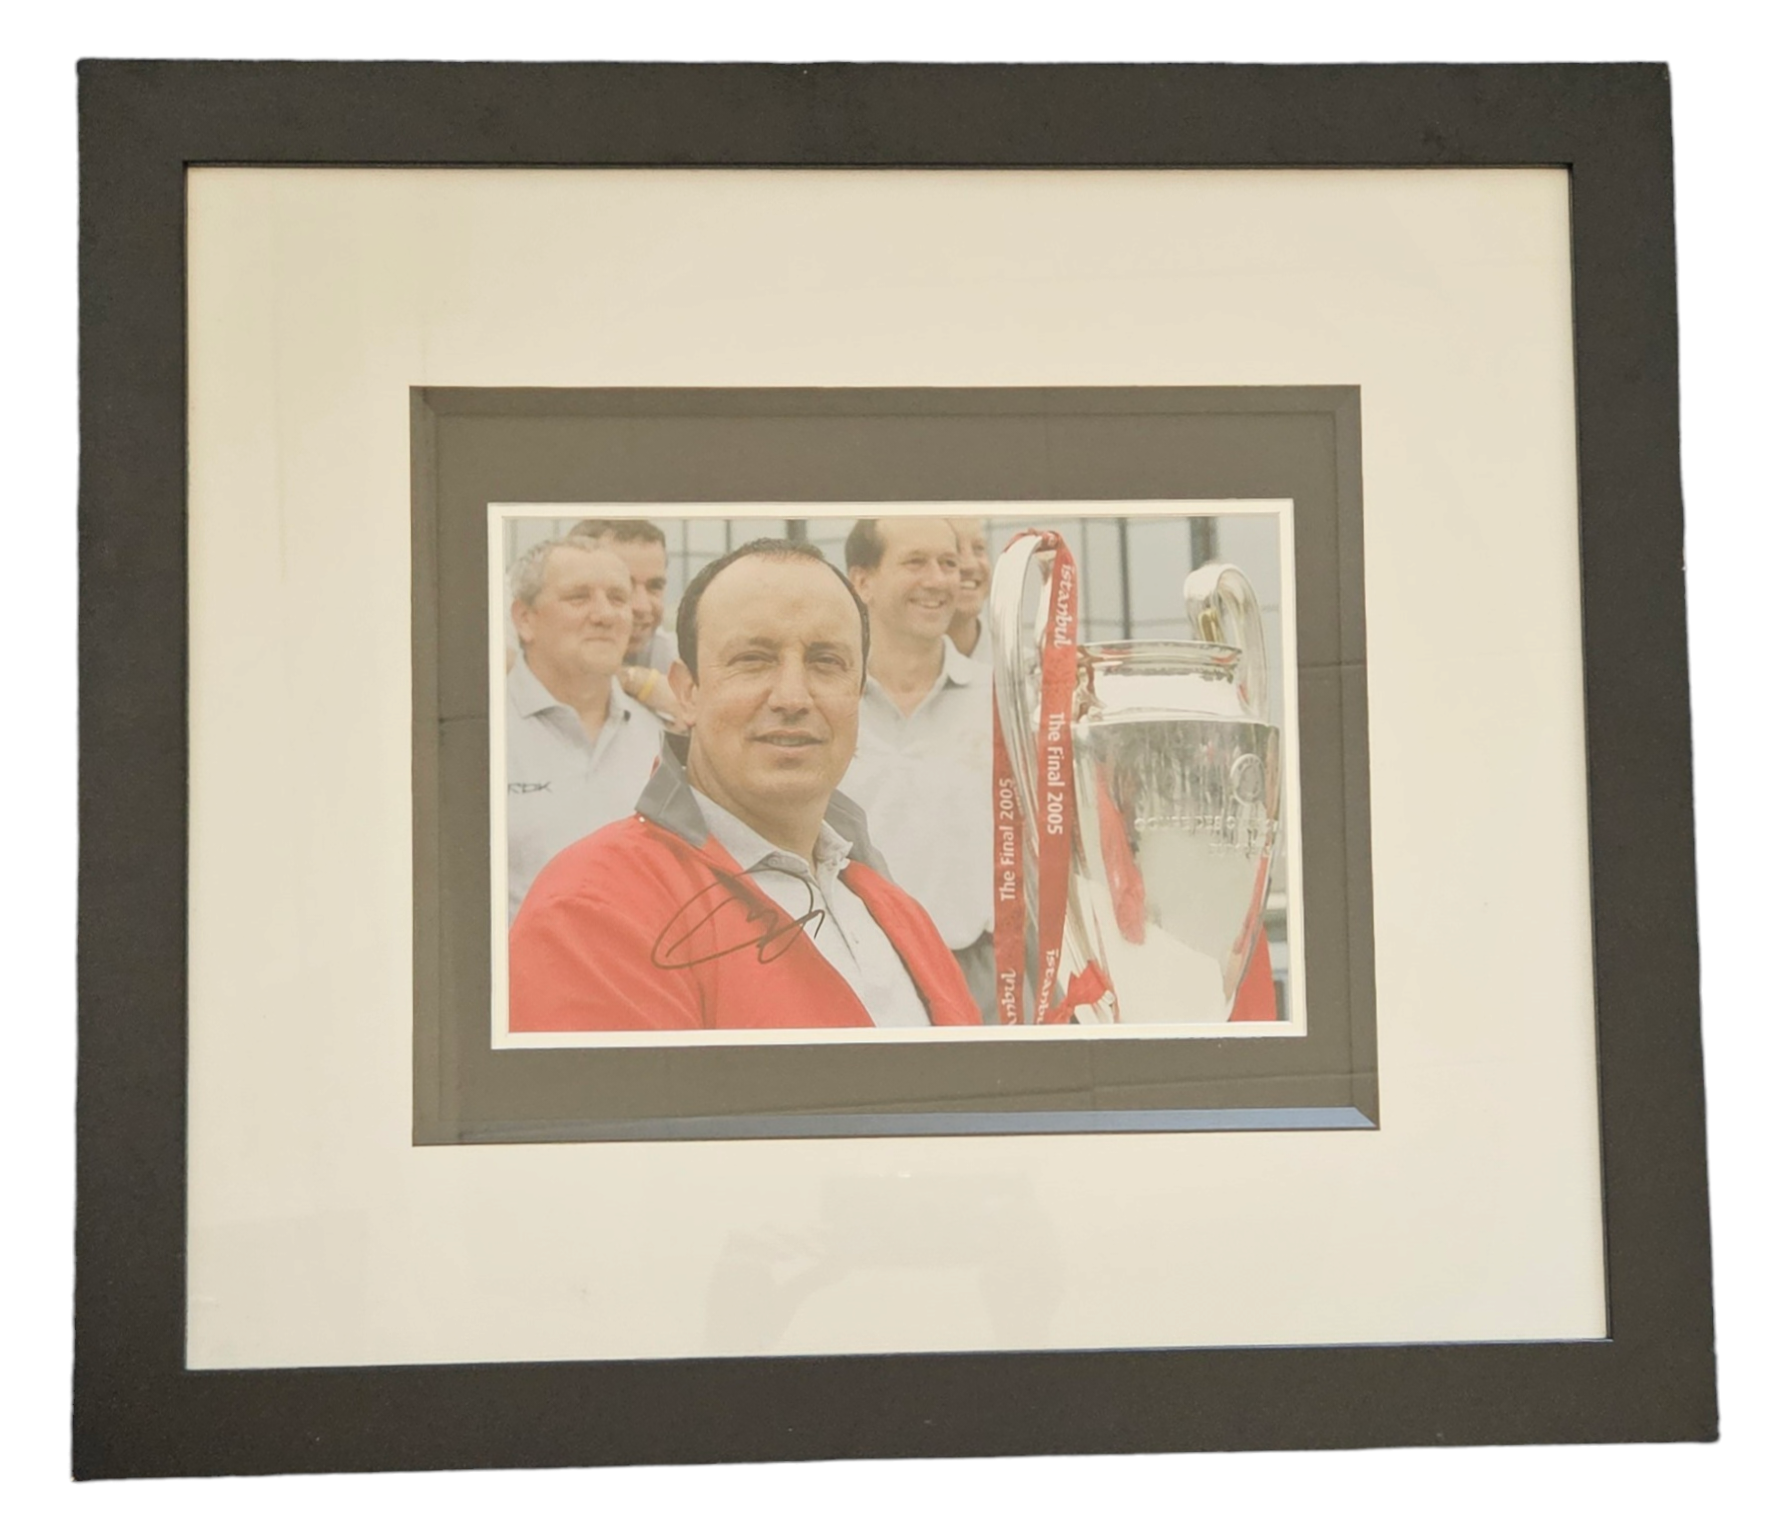 Rafael Benítez signed colour photo 12x8 Inch Photo Mounted Display in Black Framed overall size